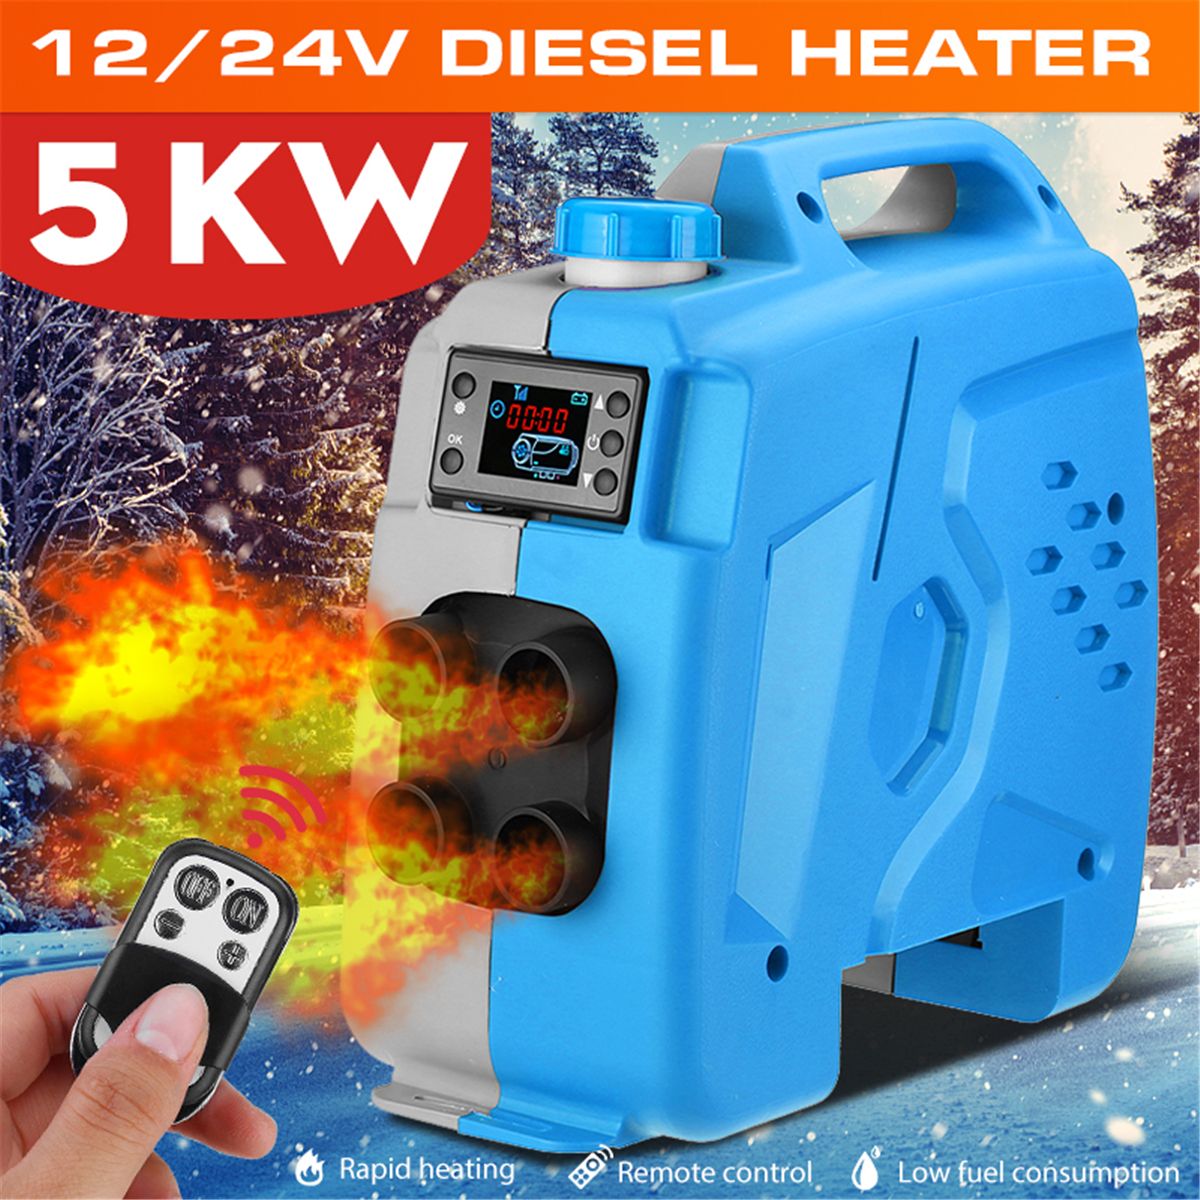 12V24V-5KW-Air-Diesel-Parking-Heater-All-In-One-LCD-4-Holes-For-Trucks-Boats-Bus-1736633